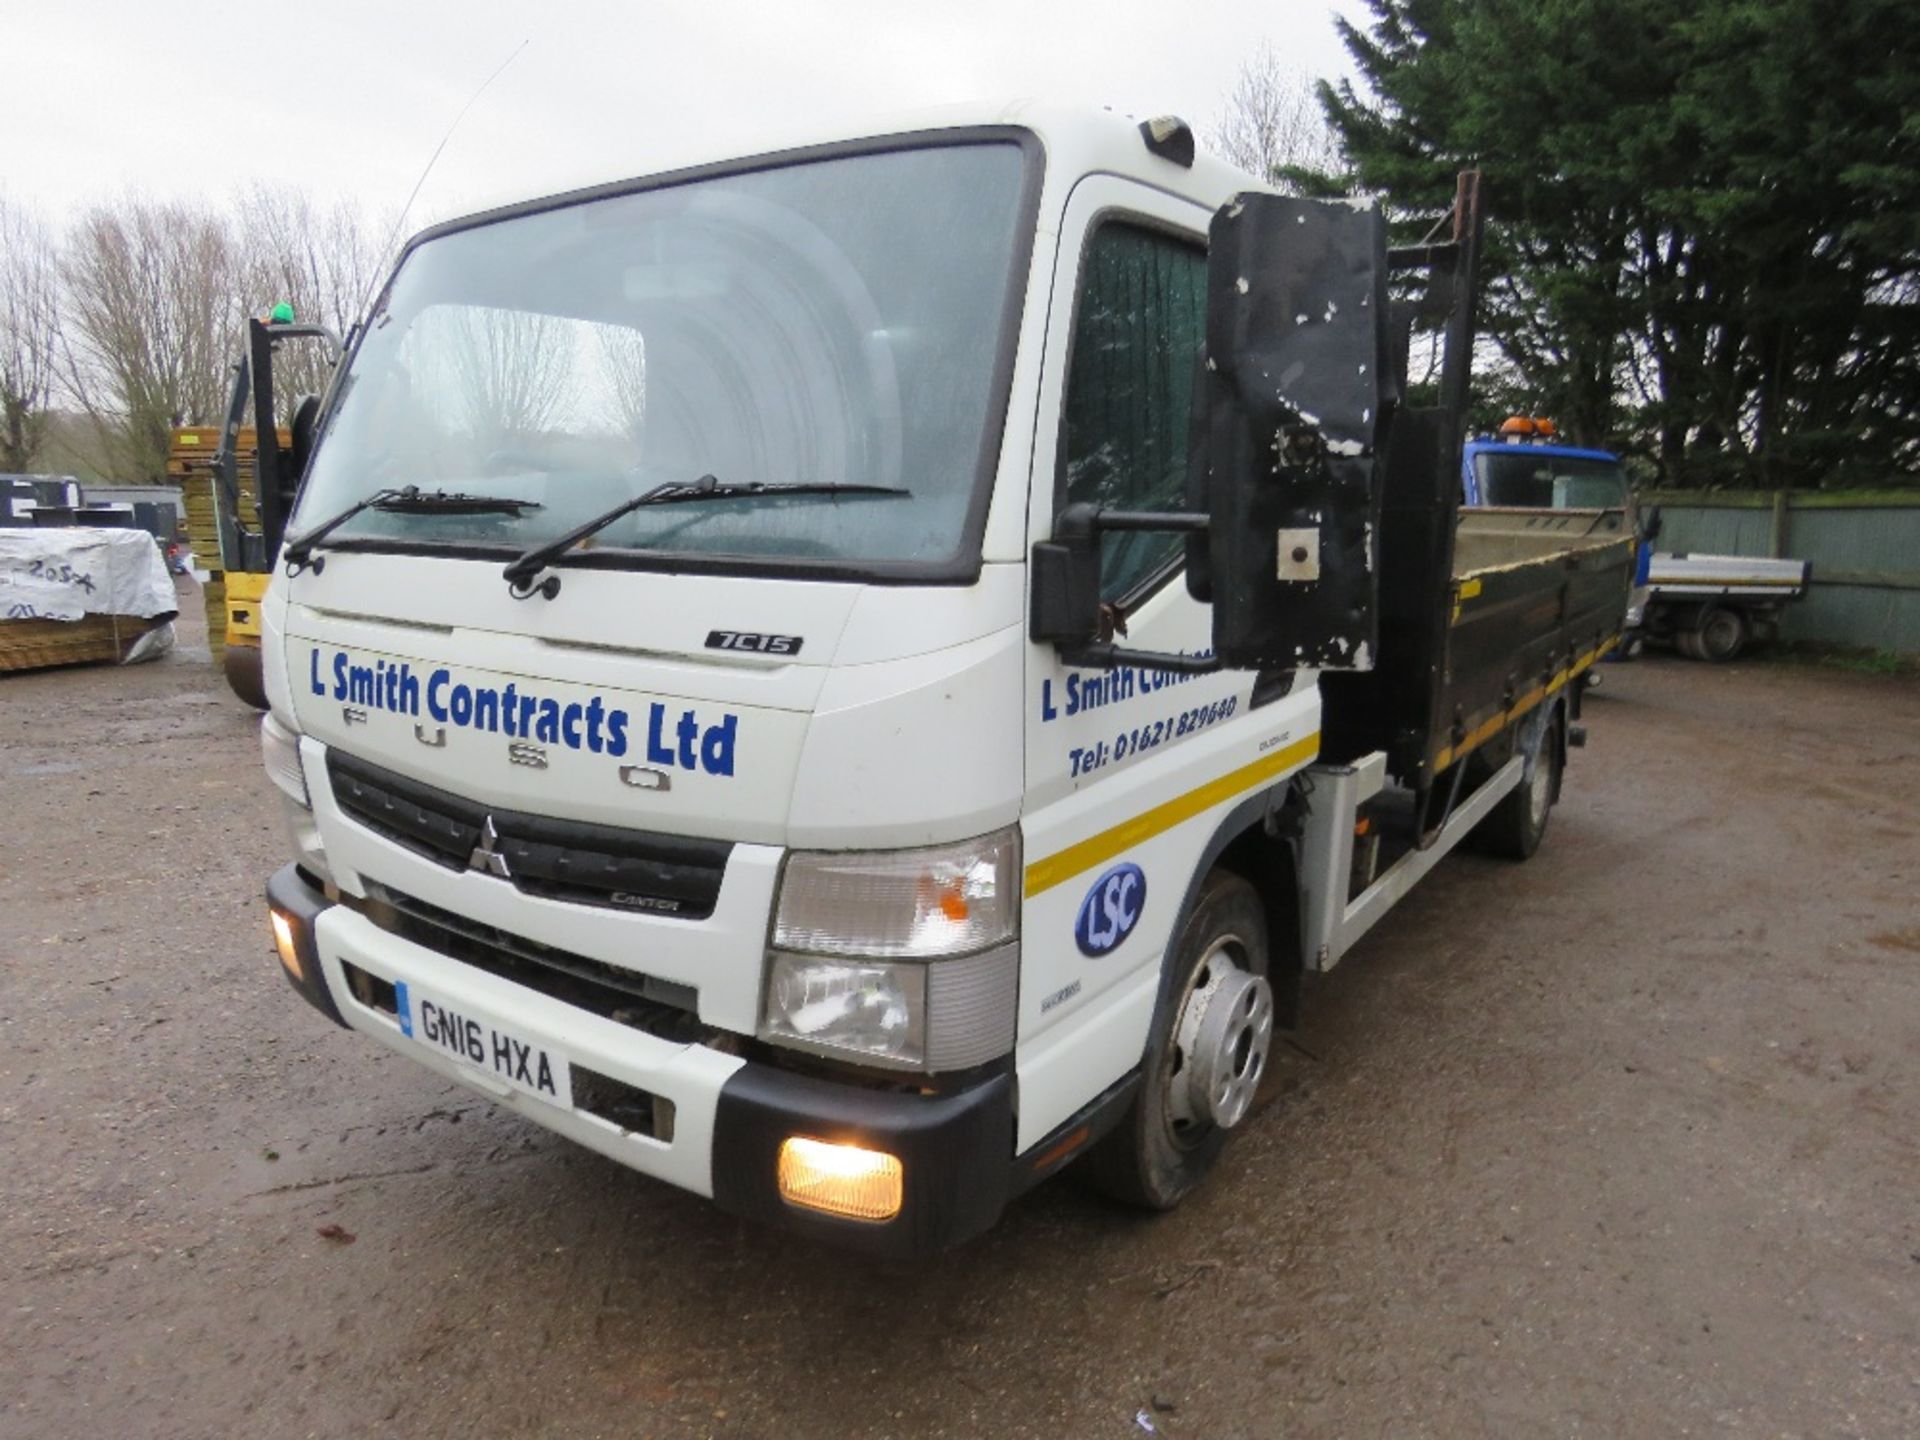 MITSUBISHI CANTER FUSO 7C15 7500KG TIPPER LORRY REG:GN16 HXA. DIRECT FROM LOCAL COMPANY WHO HAVE OWN - Image 2 of 10